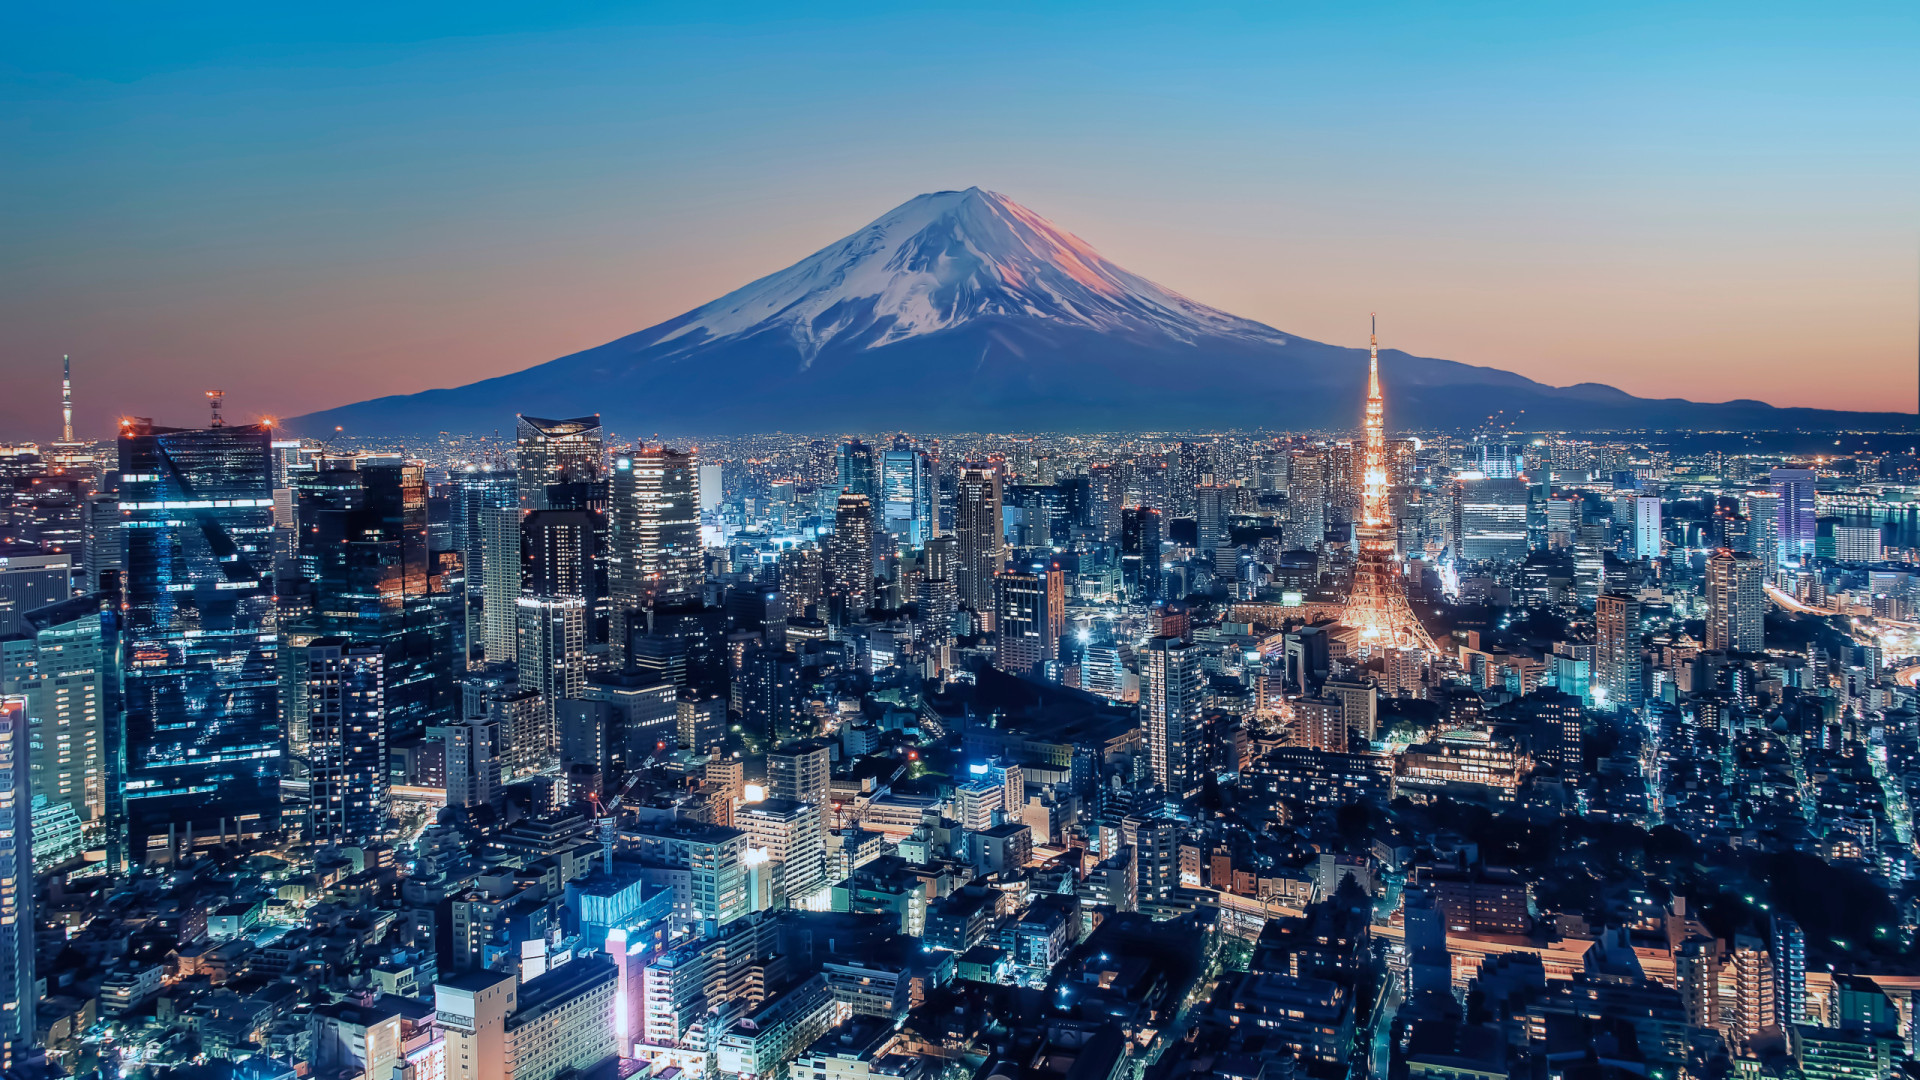 <p>Tourists in Tokyo often find value in visiting Mount Fuji, the mountain located 62 mi (100 km) away and a staple of the city’s skyline.</p><p>You may also like:<a href="https://www.starsinsider.com/n/461053?utm_source=msn.com&utm_medium=display&utm_campaign=referral_description&utm_content=700885en-us"> Celebrities who go barefootin'</a></p>